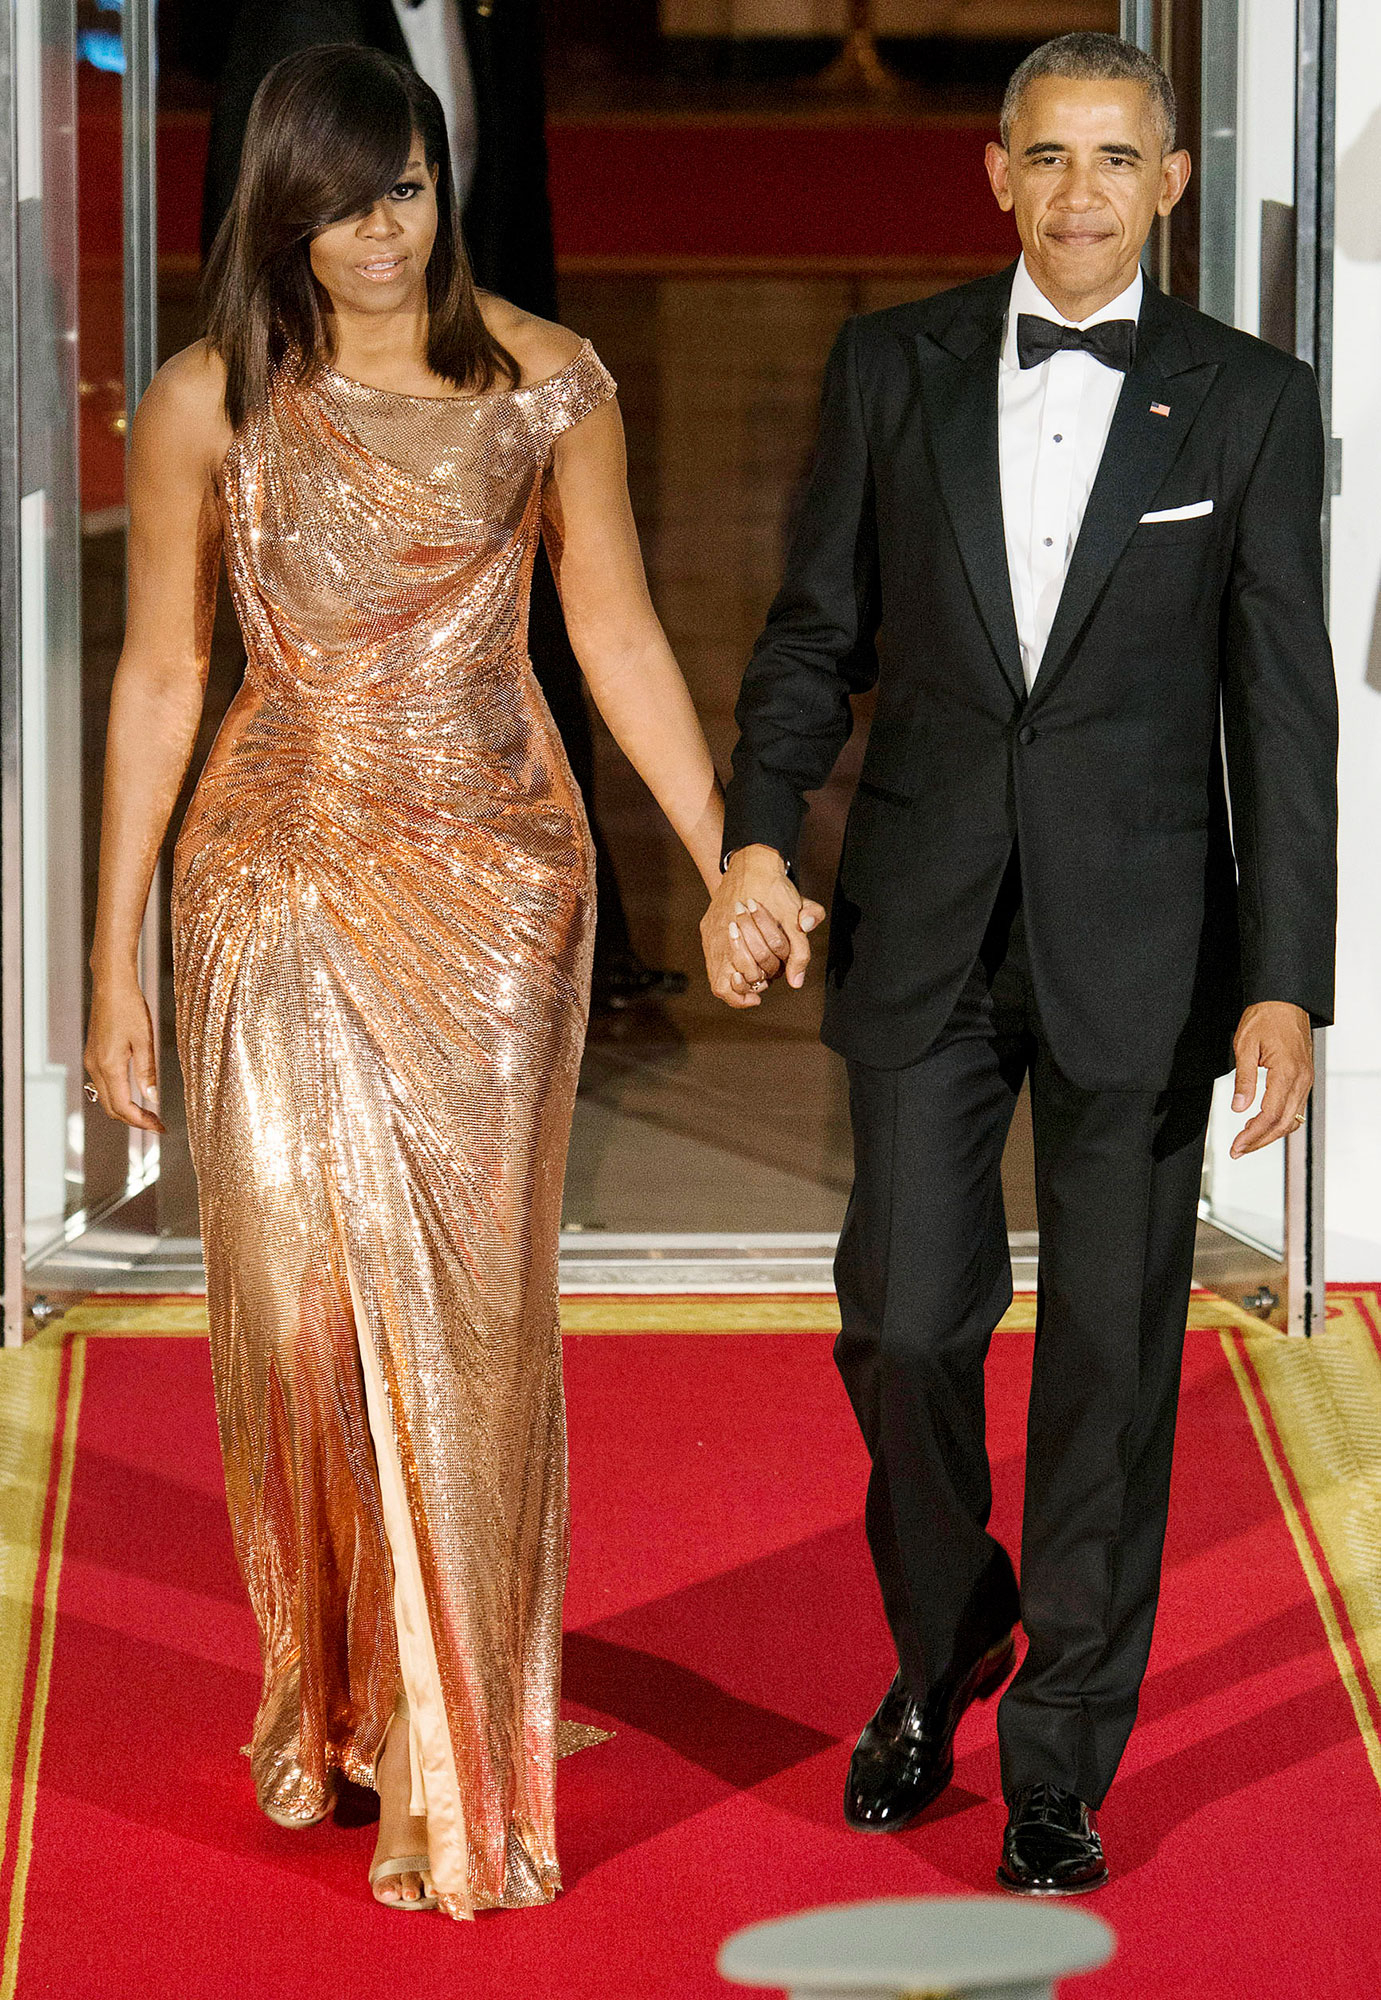 Michelle Obama</a><br> by <a href='/profile/Bling-King/'>Bling King</a>